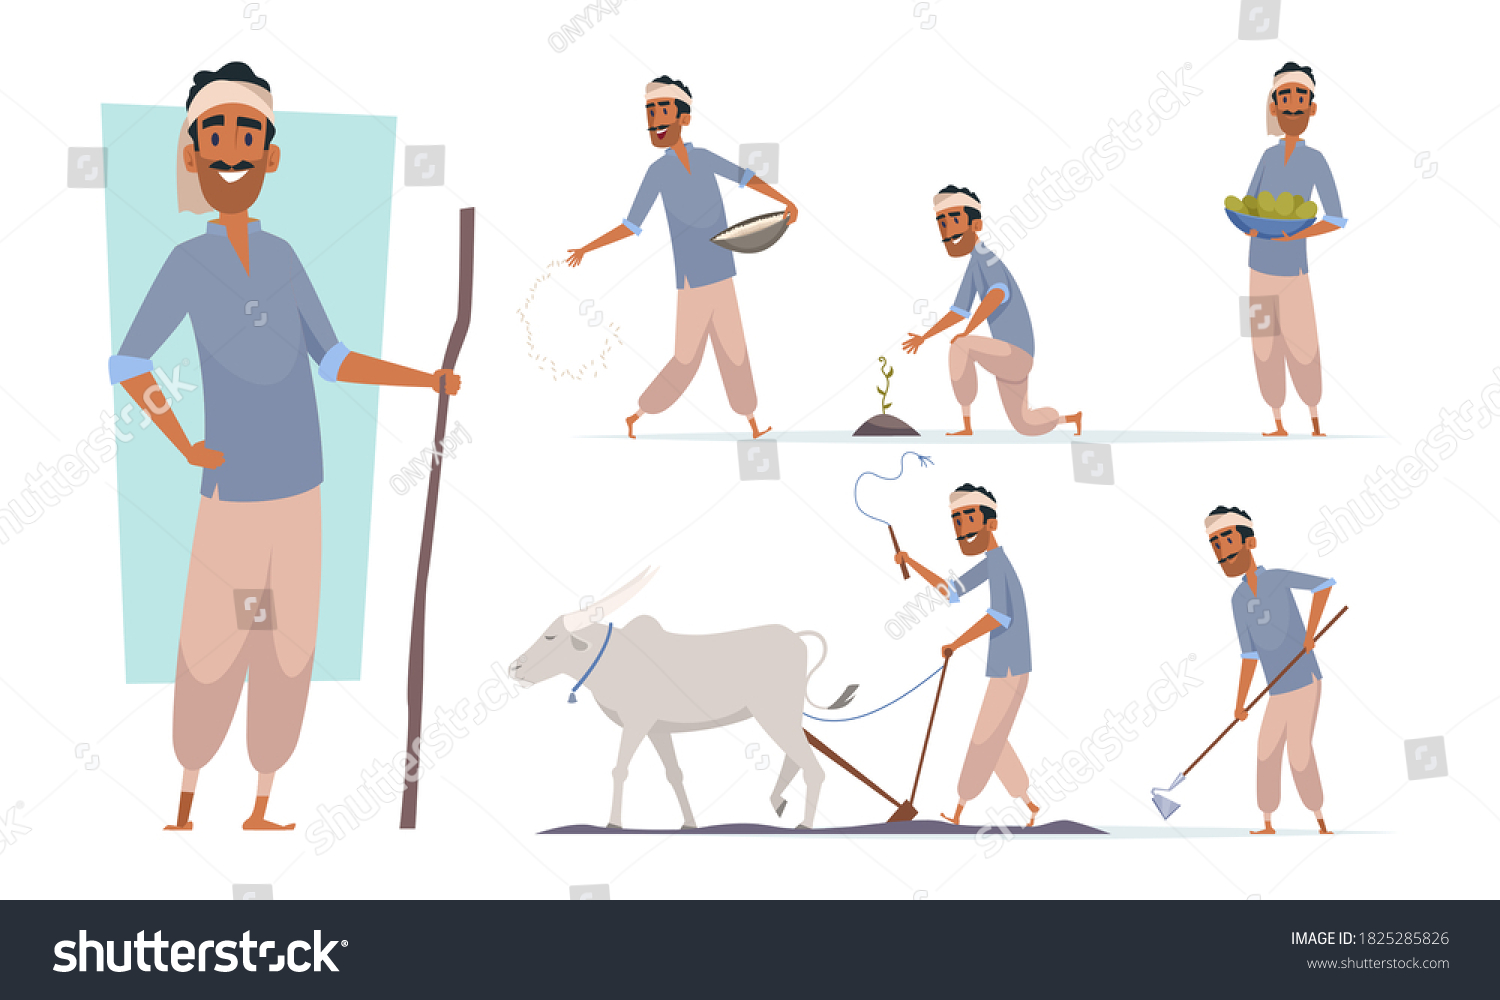 Indian farmer. India village cheering characters working with cow harvesting bangladesh people vector #1825285826